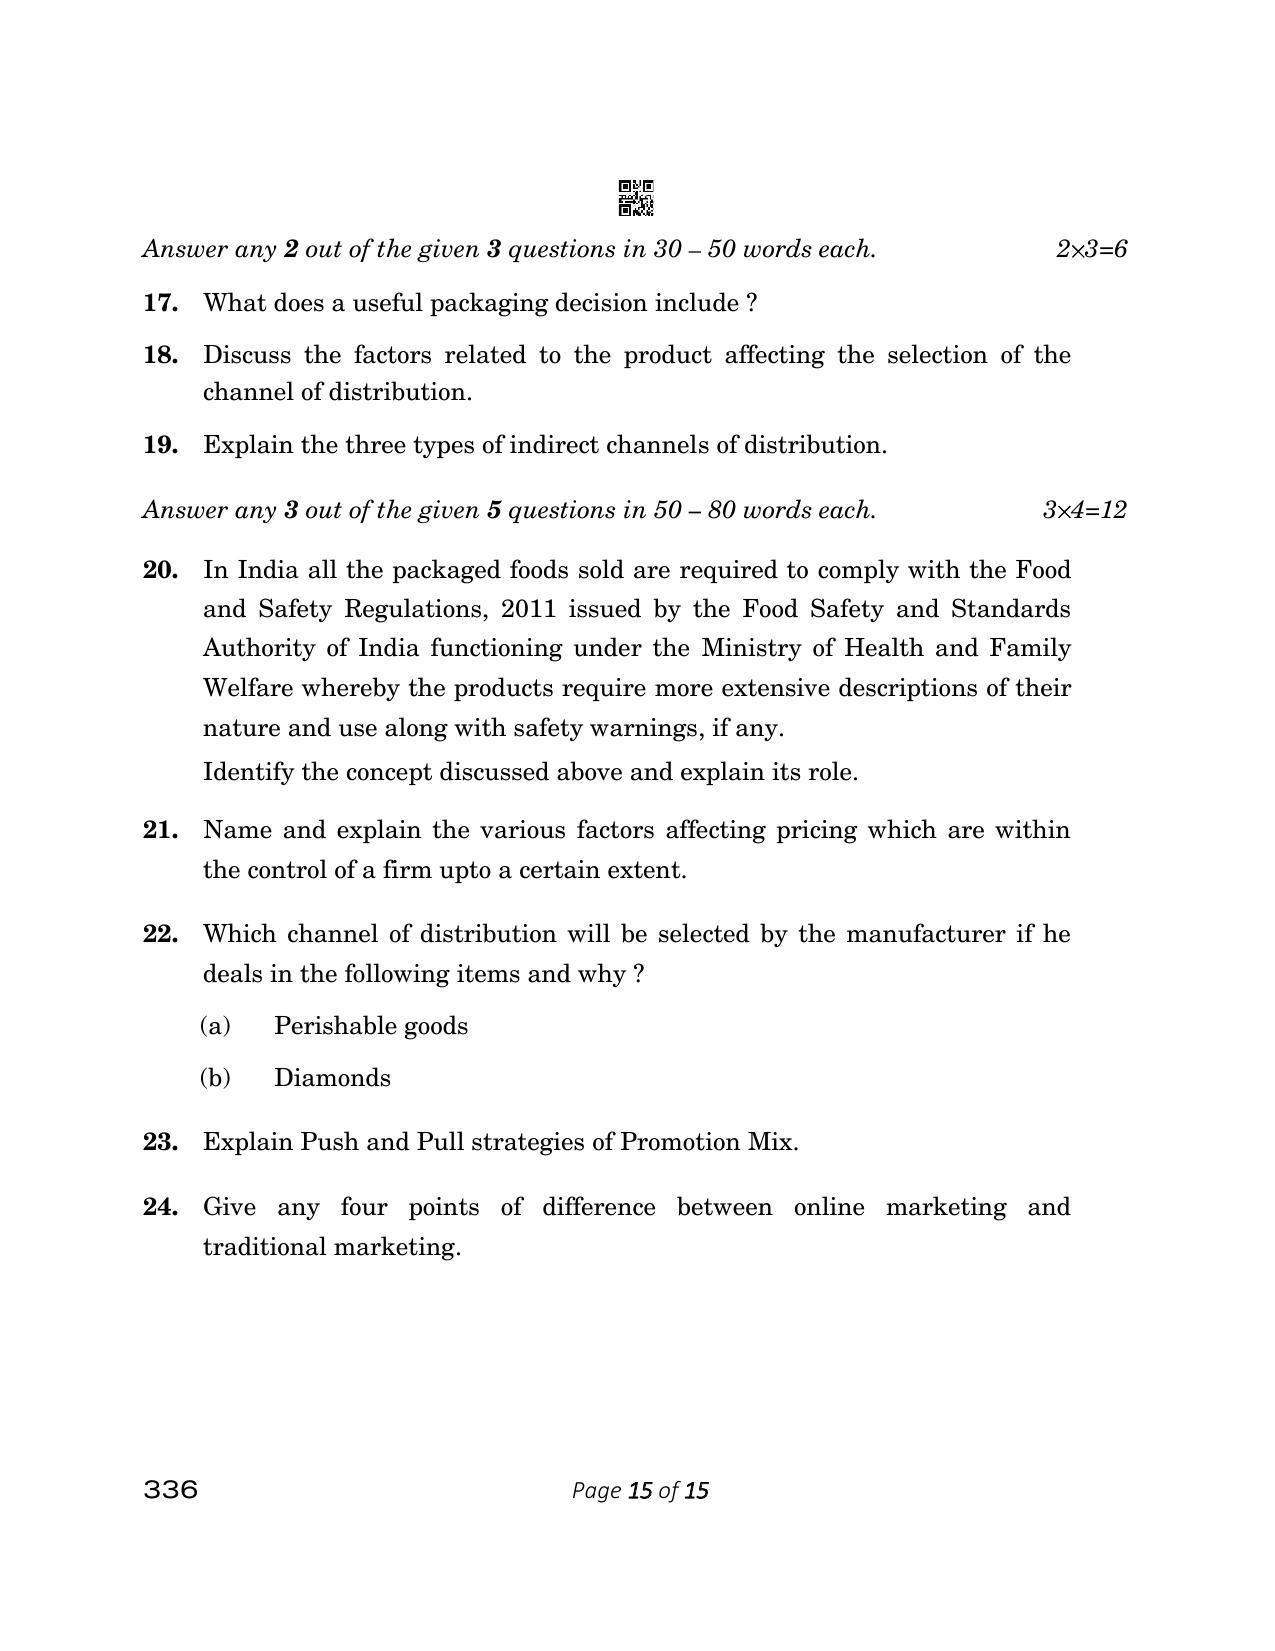 CBSE Class 12 336_ Marketing 2023 Question Paper - Page 15